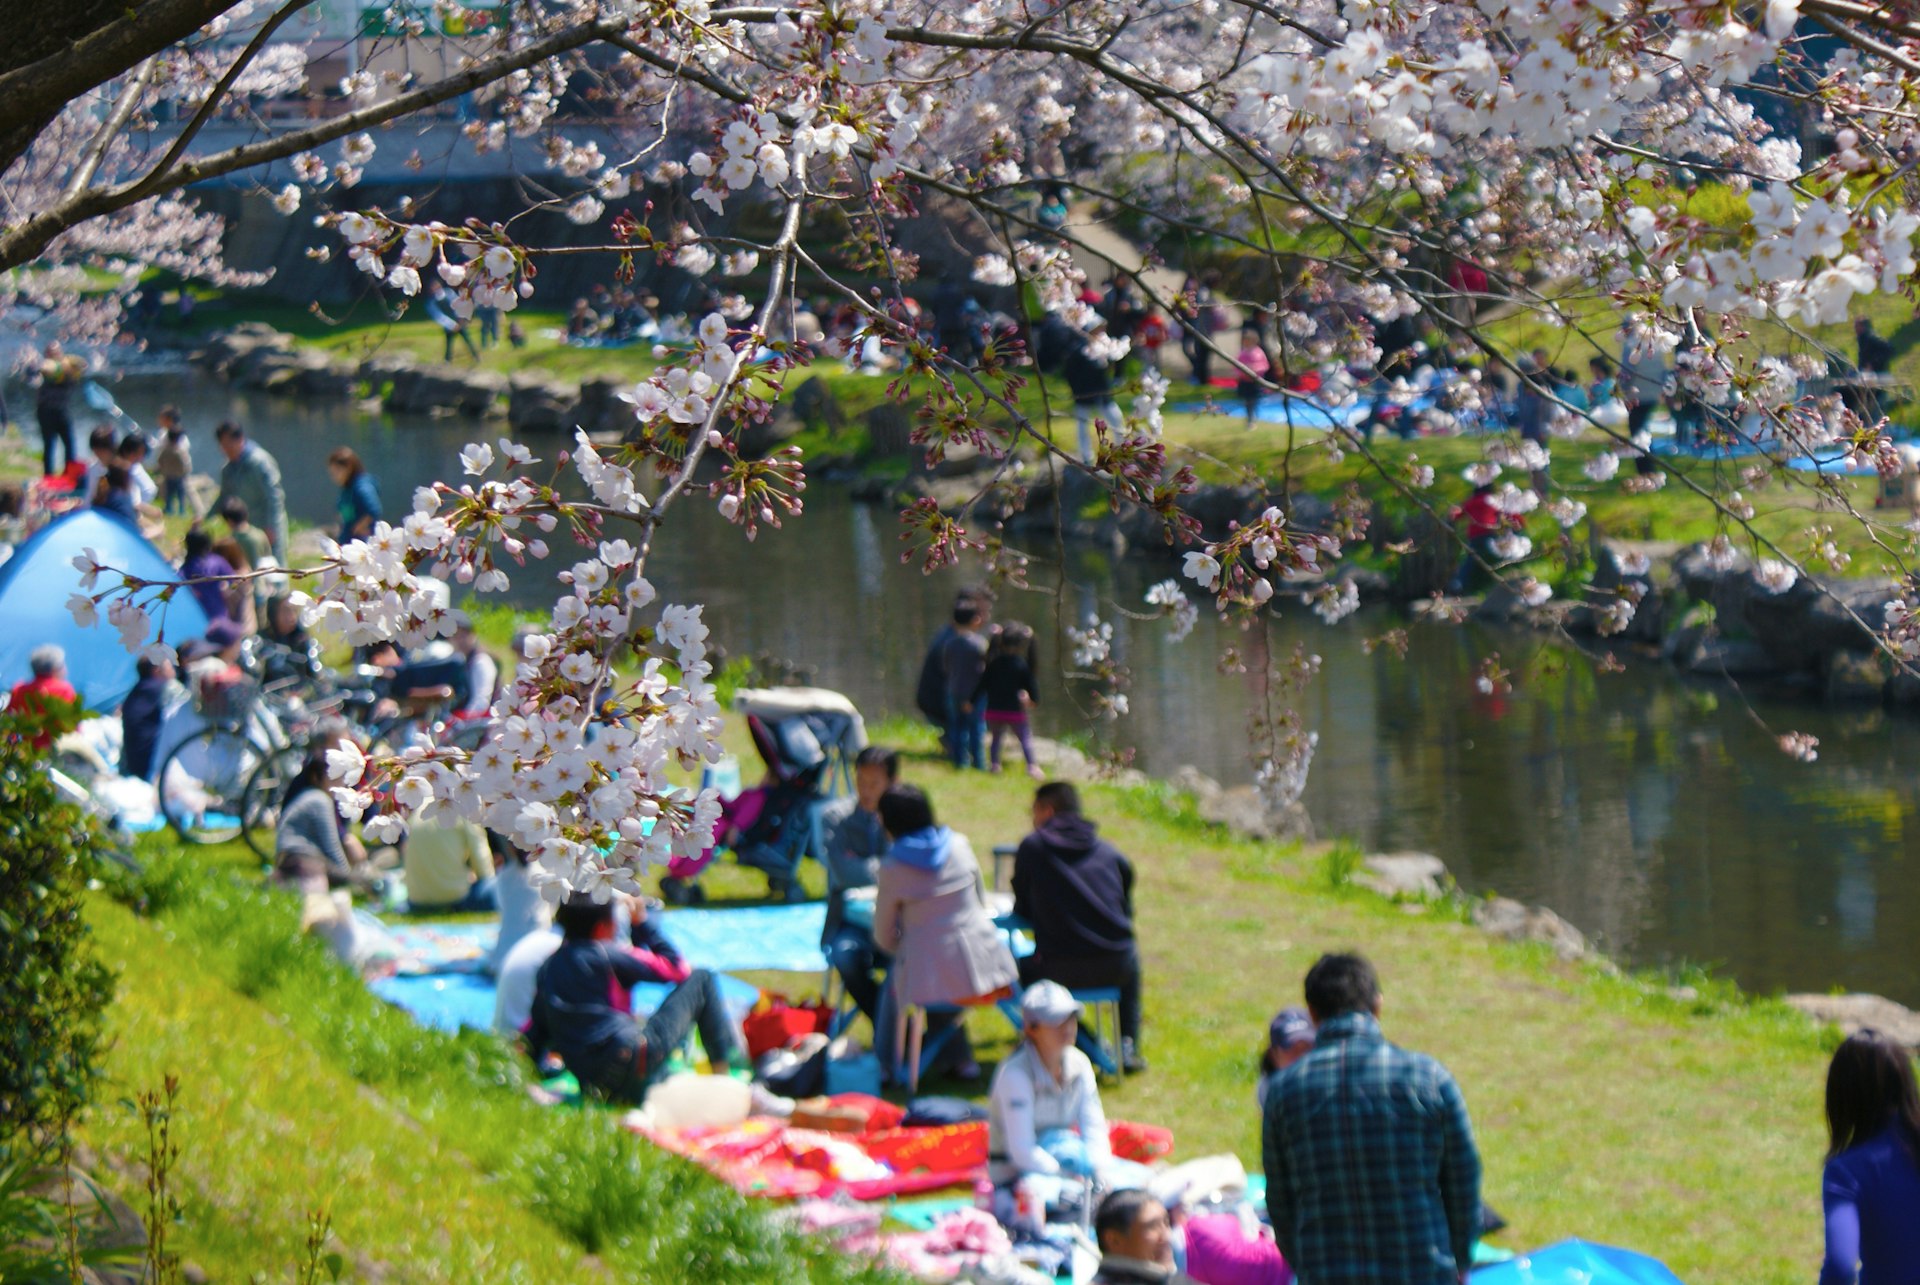 In the foreground, a cherry blossom tree is in bloom in a Tokyo park, while in the backgound many people sit in a park enjoying picnics on a sunny day